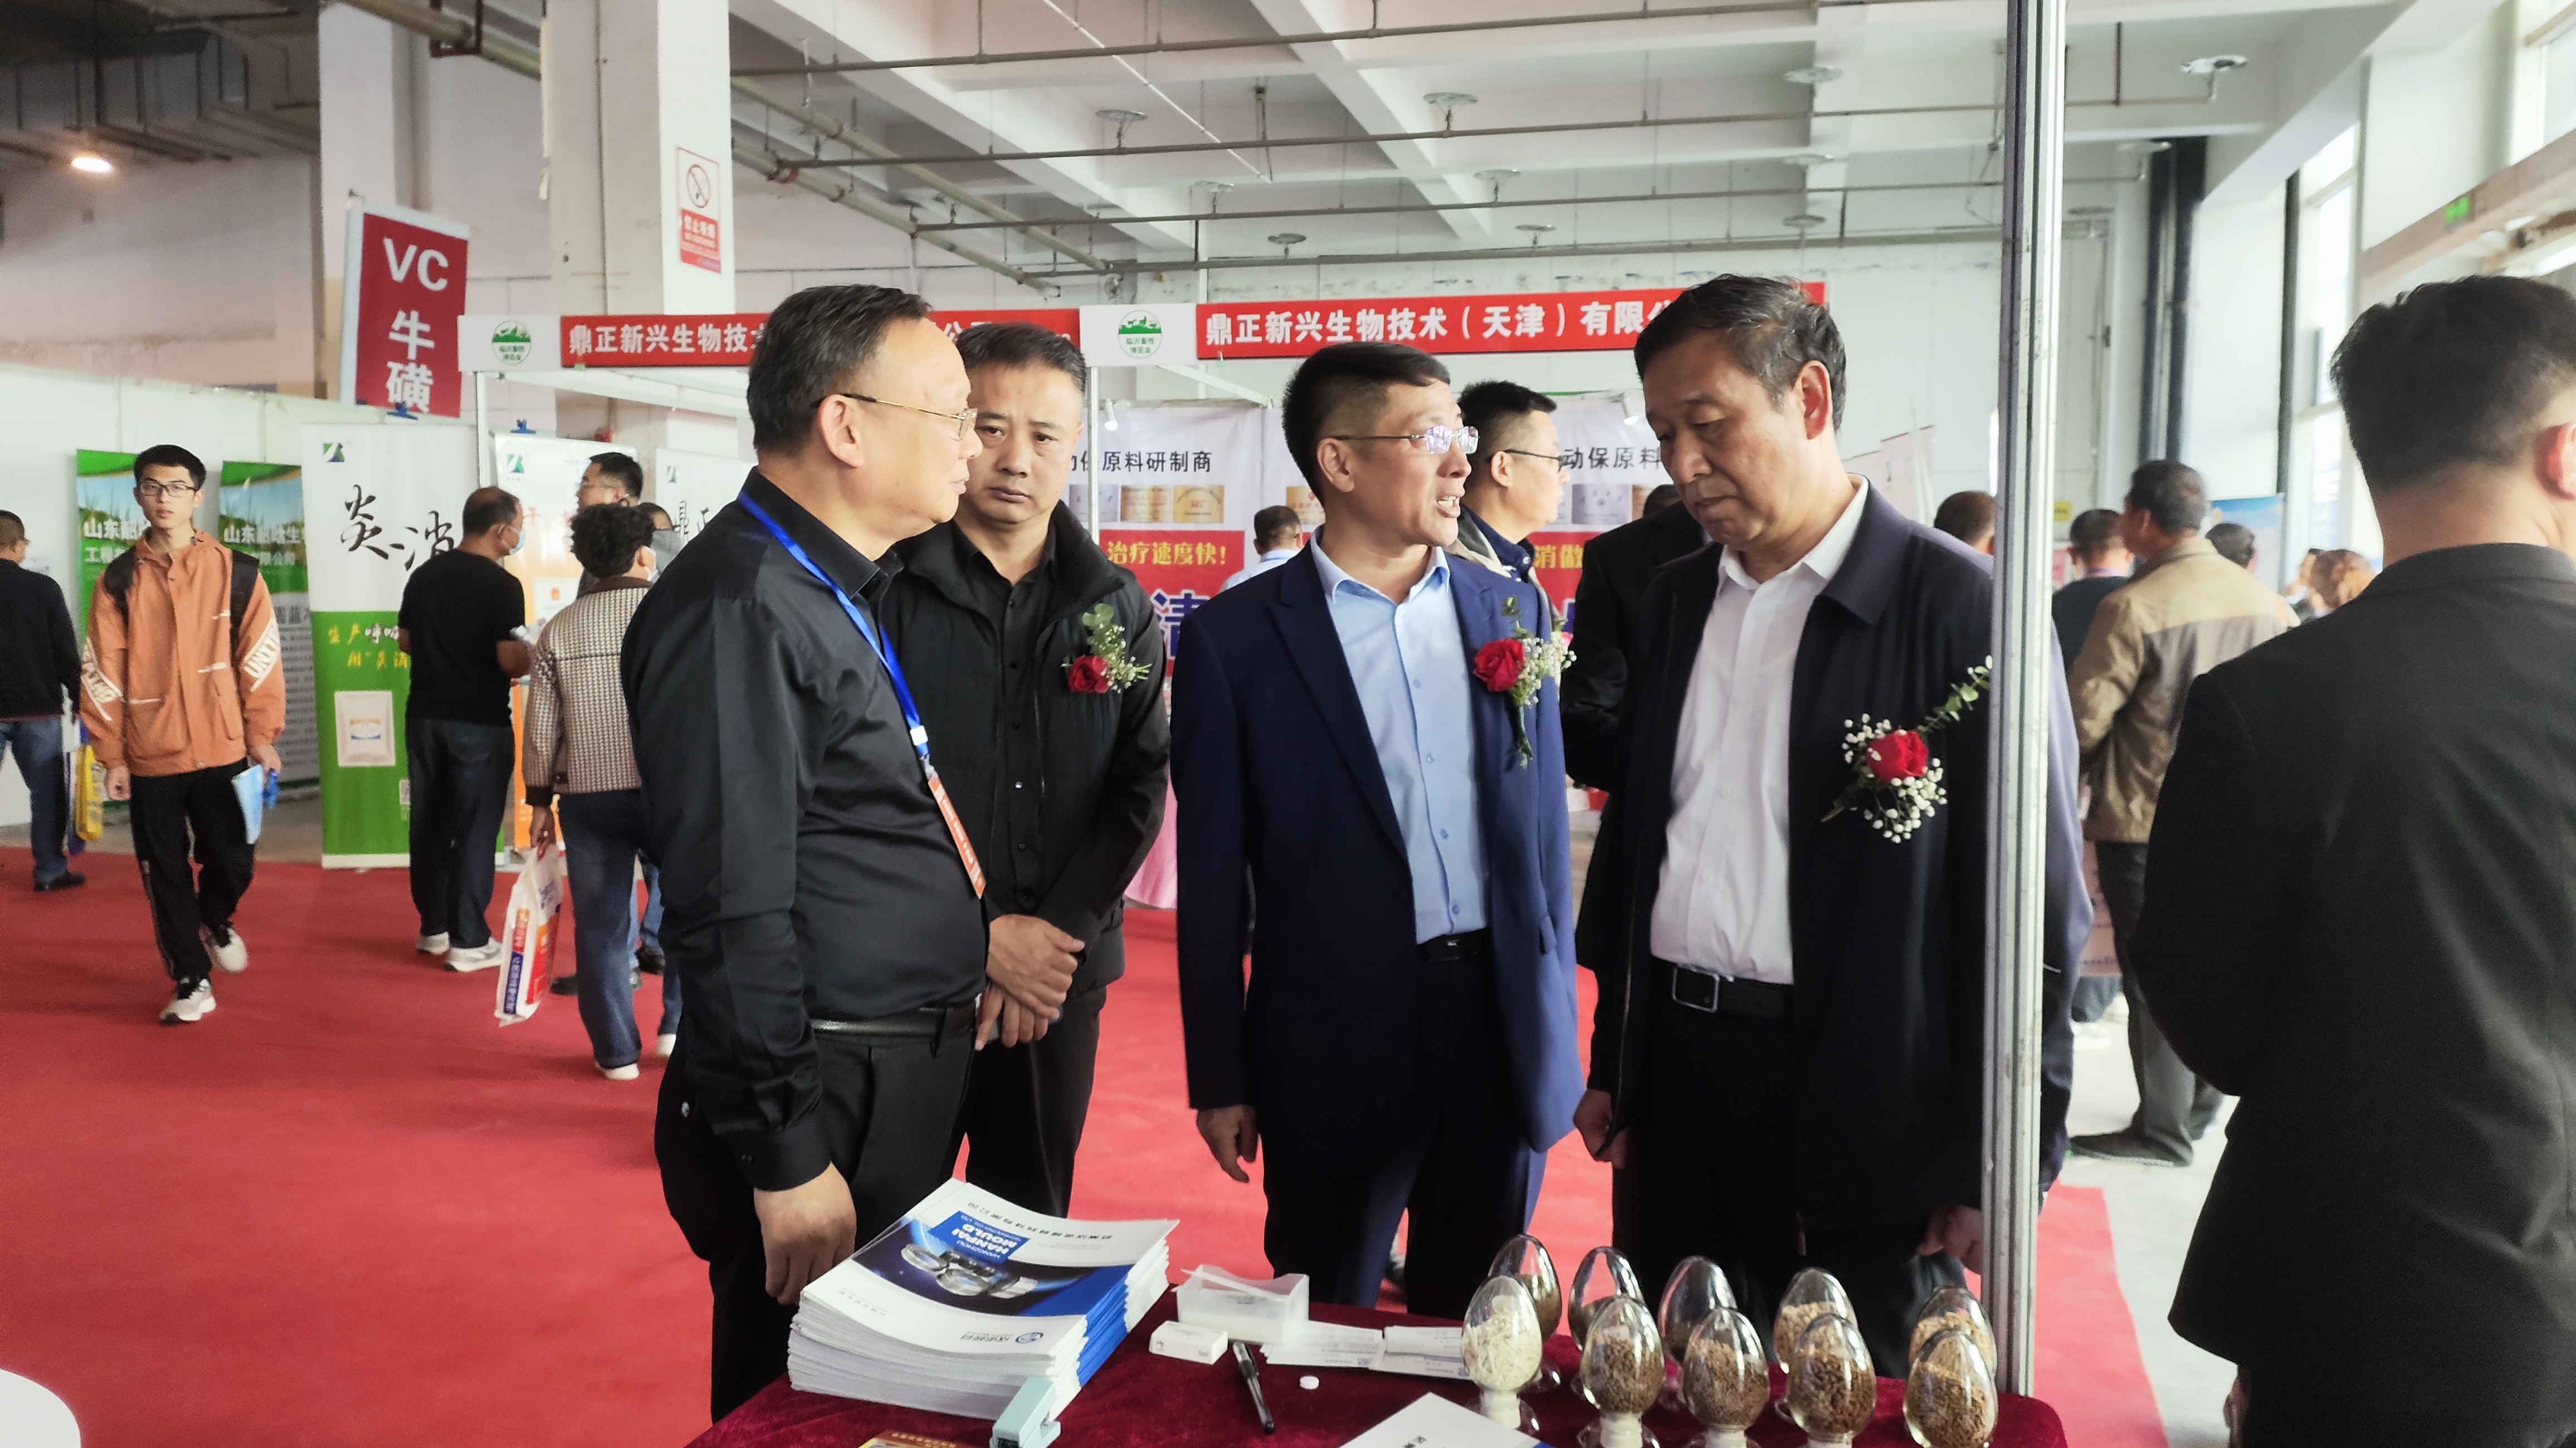 Our company participated in the Shandong Animal Husbandry and Feed Industry Expo